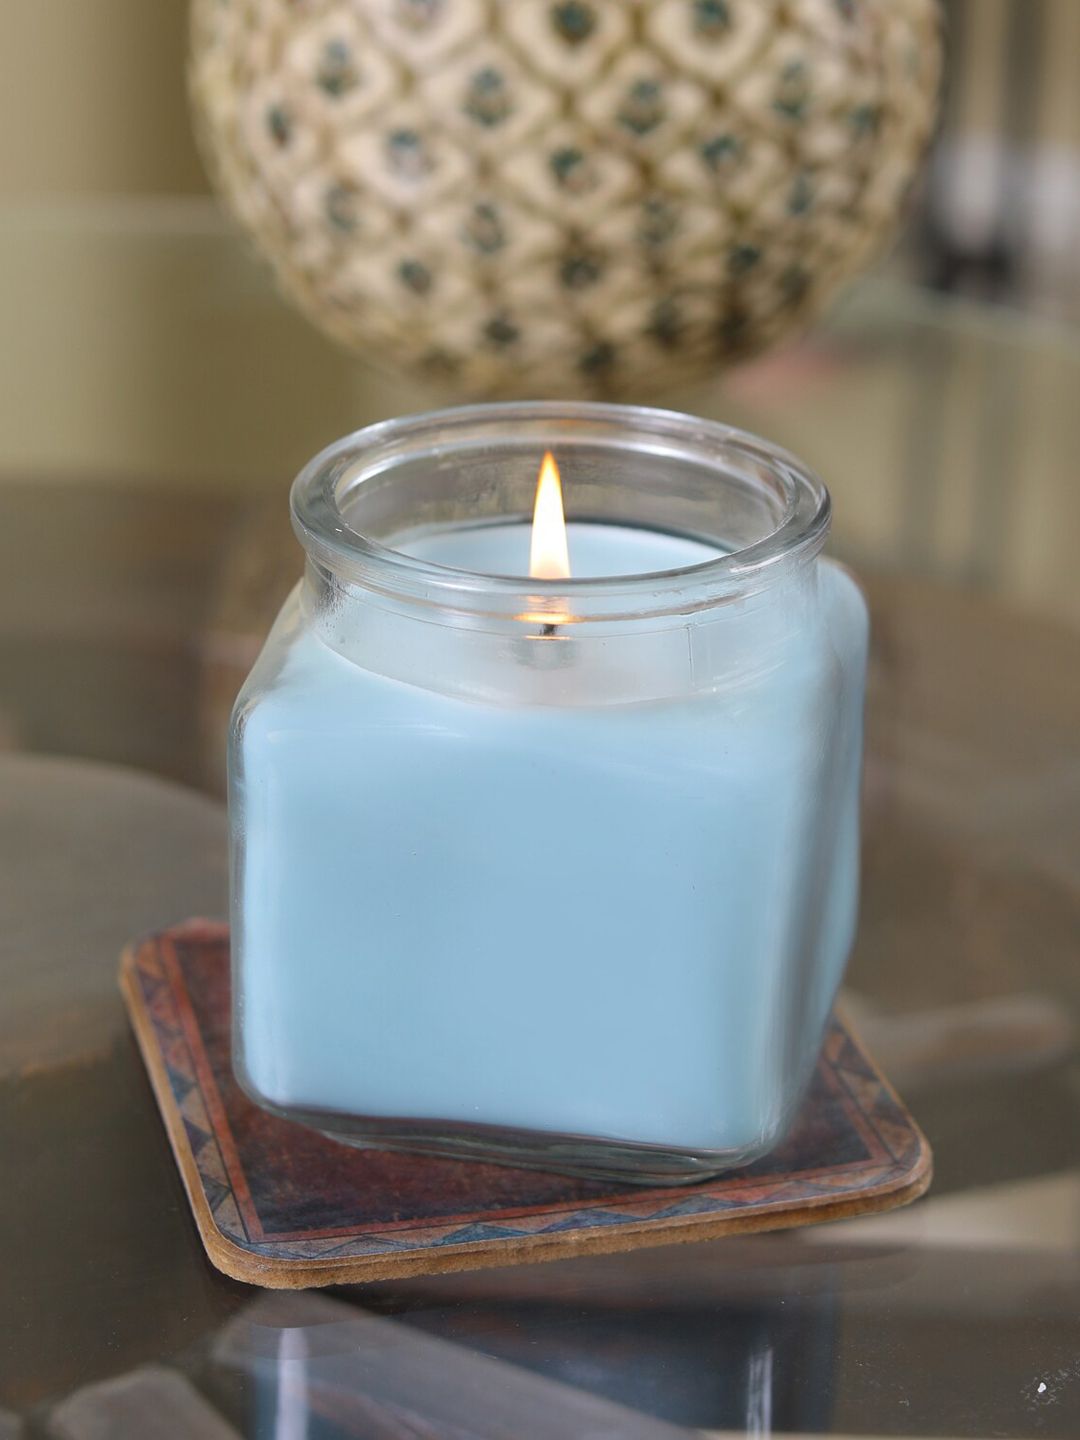 HOSLEY Blue Hosley Caribbean Breeze Fragranced Jar Candle Price in India